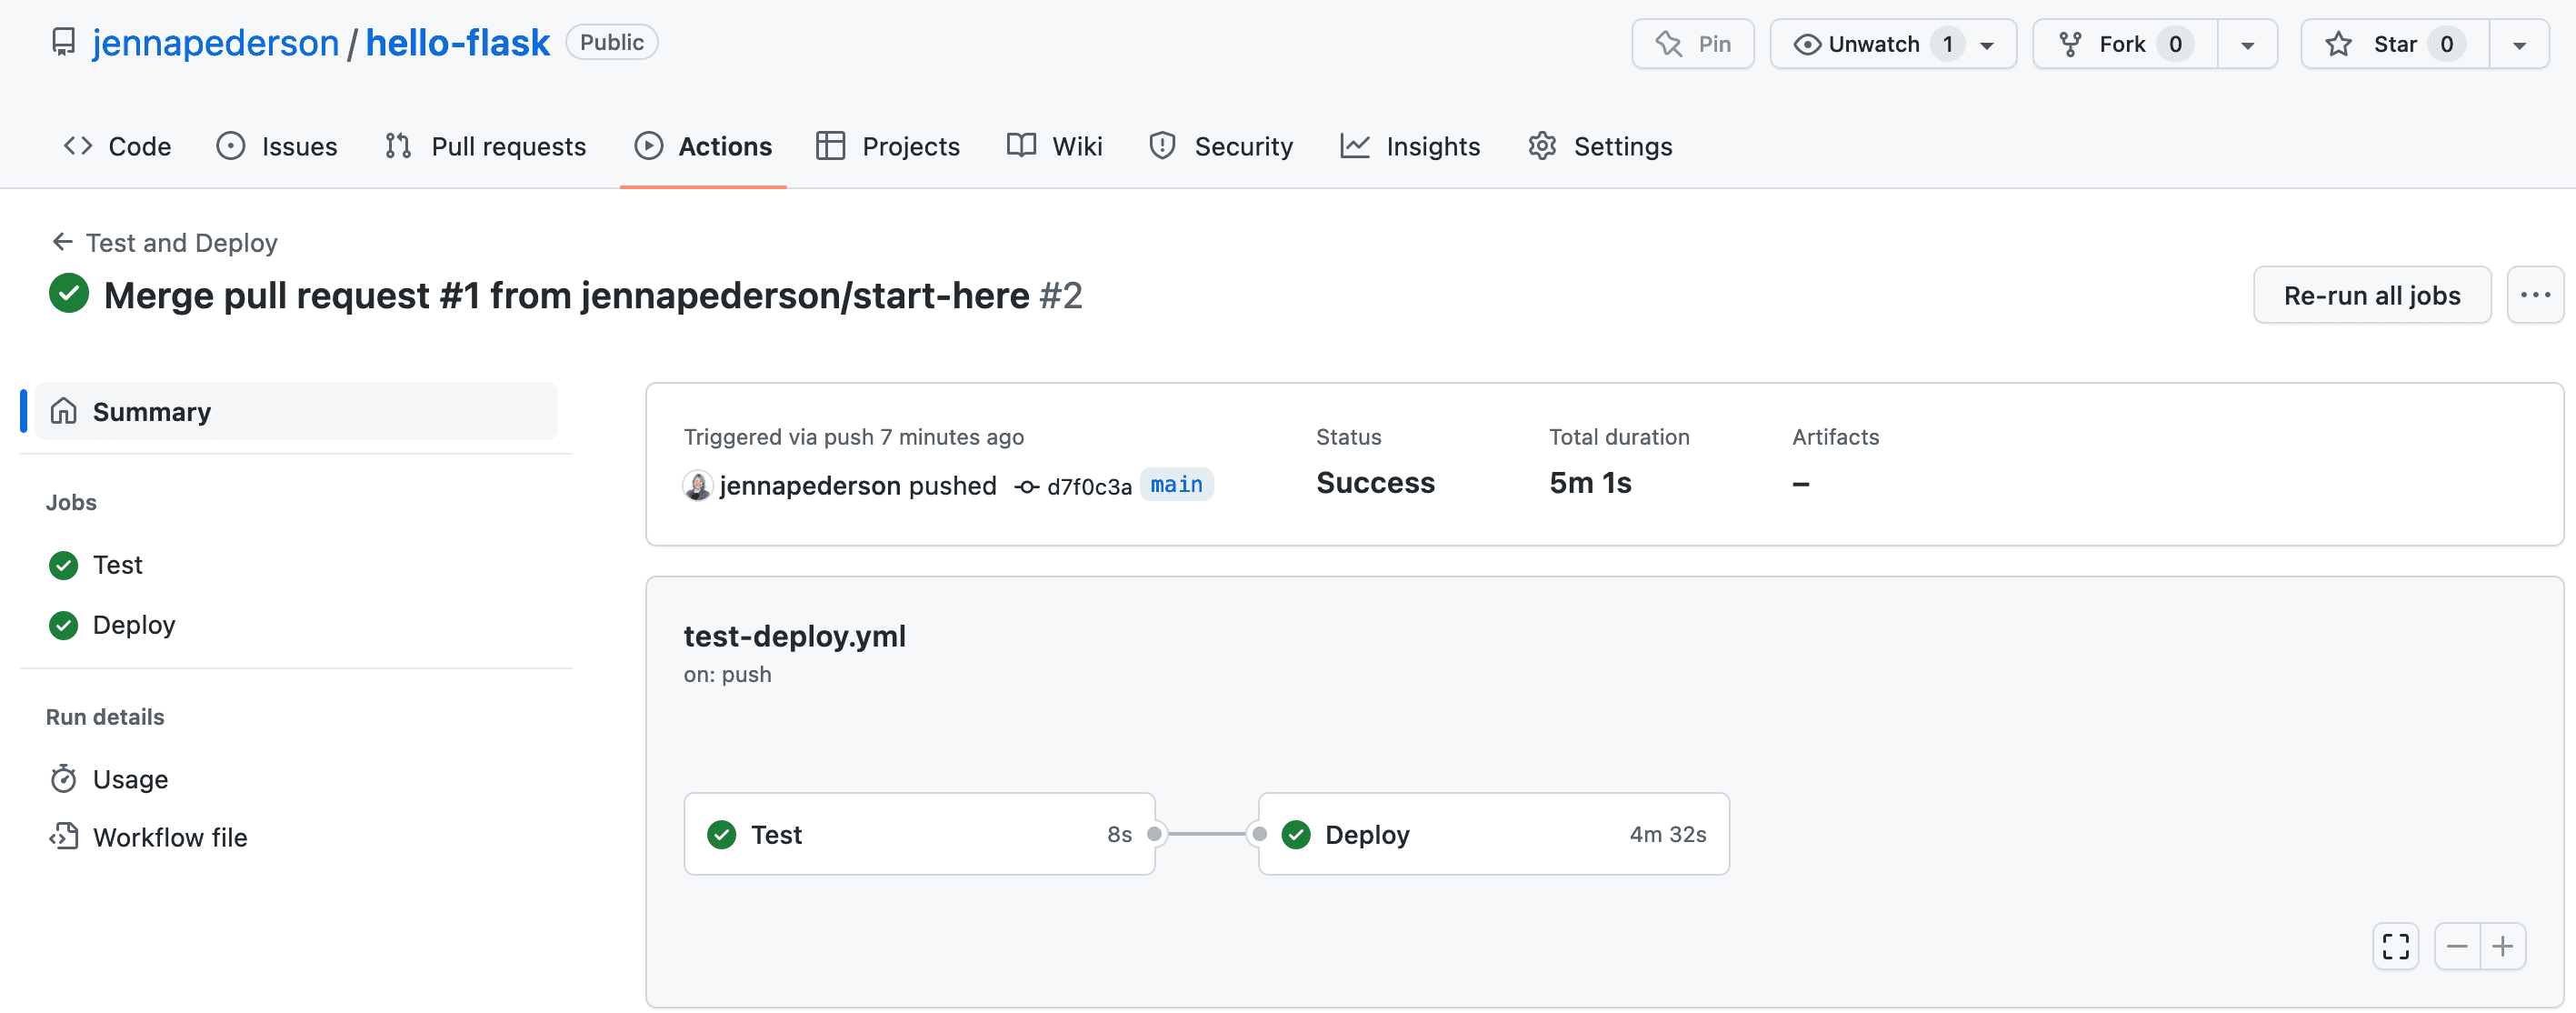 Shows the Actions tab of the  GitHub repo and the details page of the running workflow, where both the Test and Deploy jobs have completed successfully